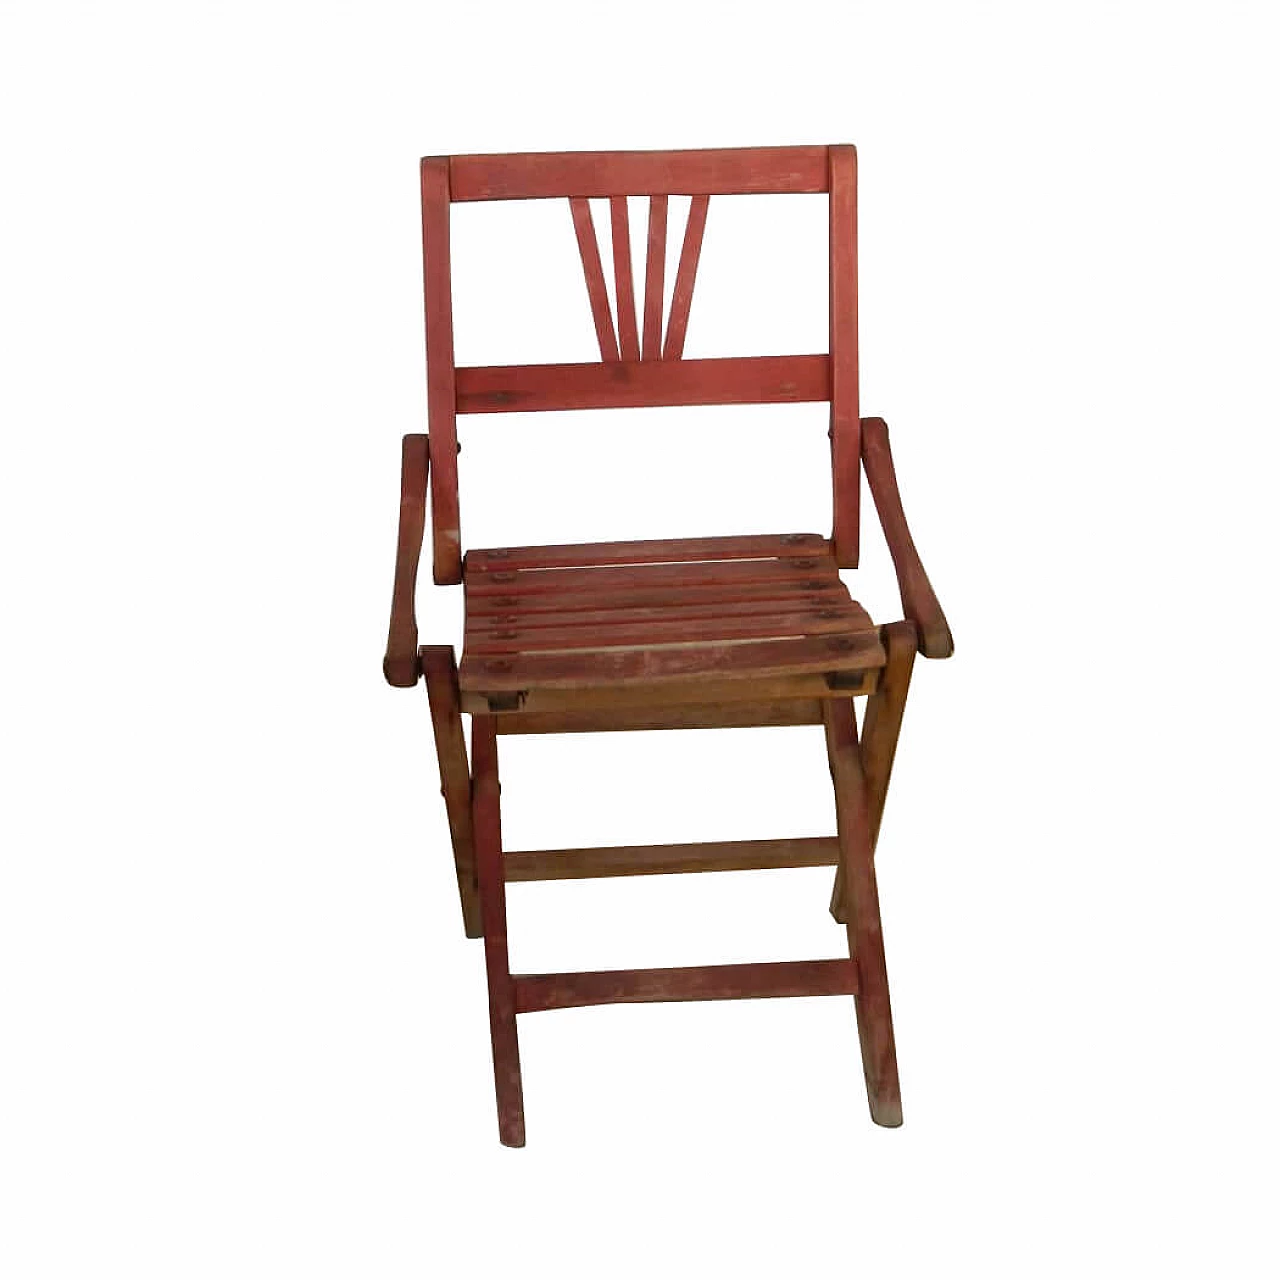 Vintage foldable kids chair in red wood, anni 70 1100935